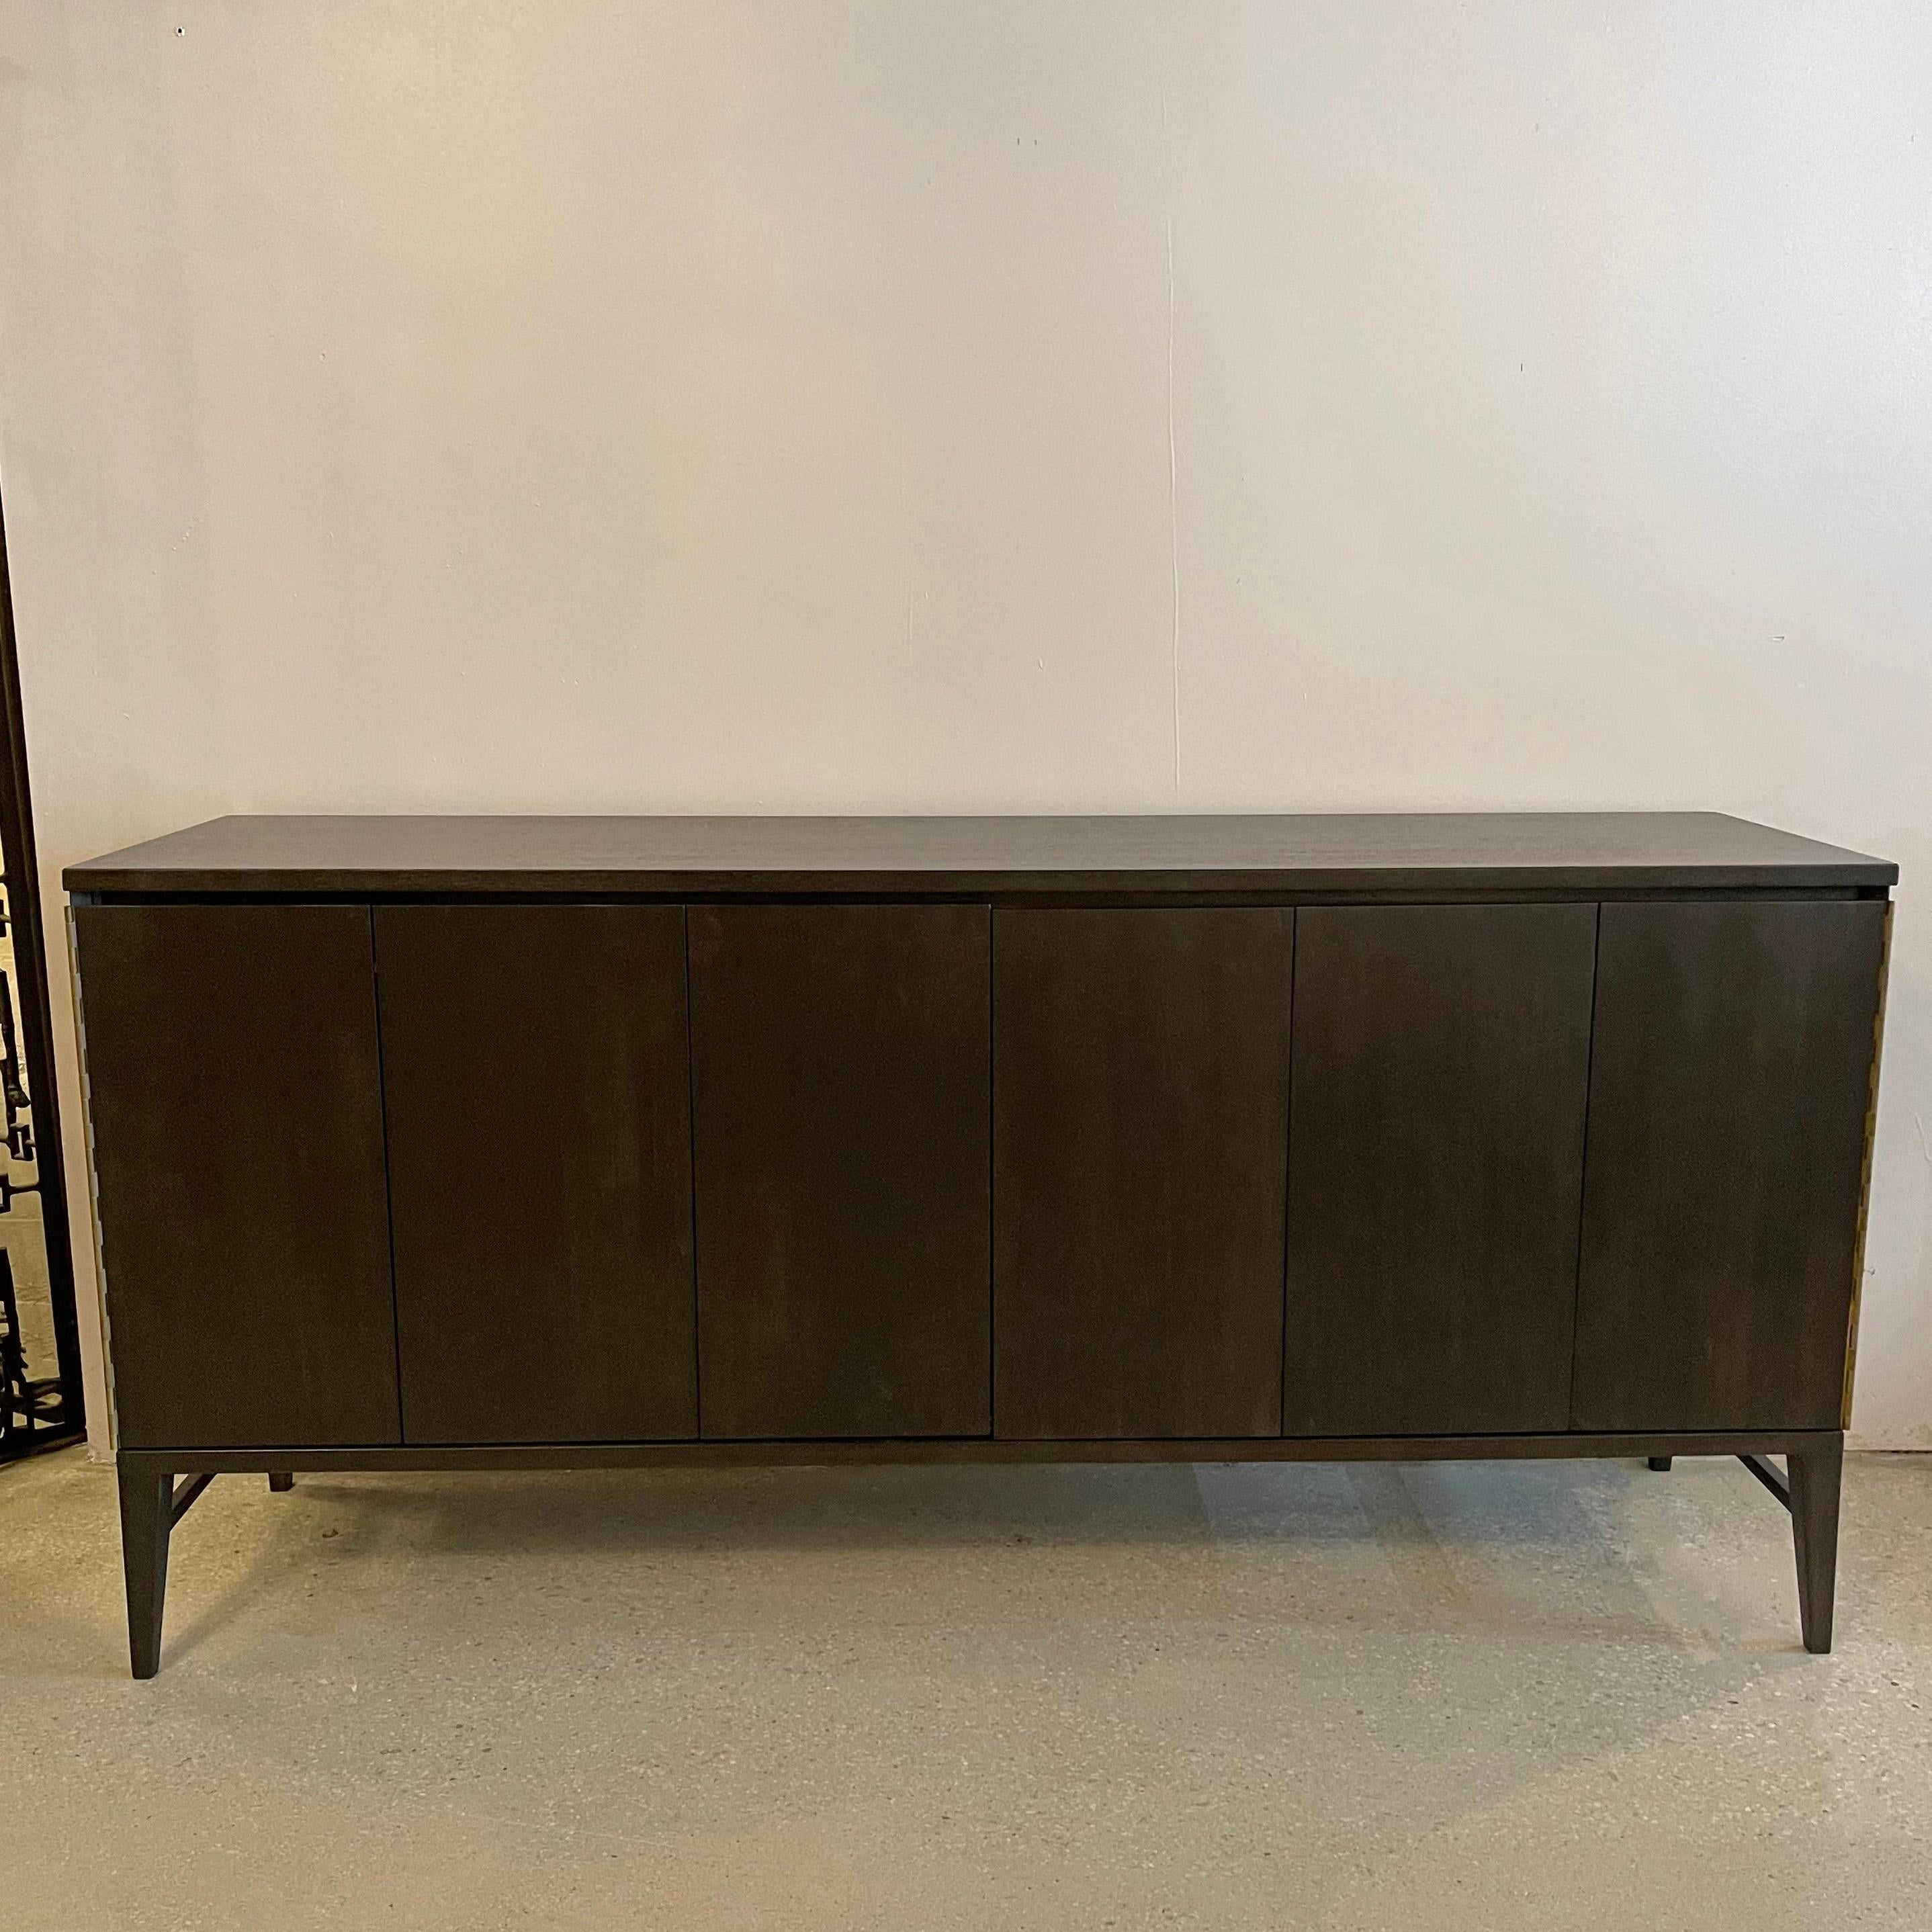 Mid-century modern, double-wide, credenza configuration, concealed mahogany dresser by Paul McCobb, Irwin Collection for Calvin Furniture features accordian fronts that open to reveal eight drawers at 5.5 inches height with scoop fronts to open